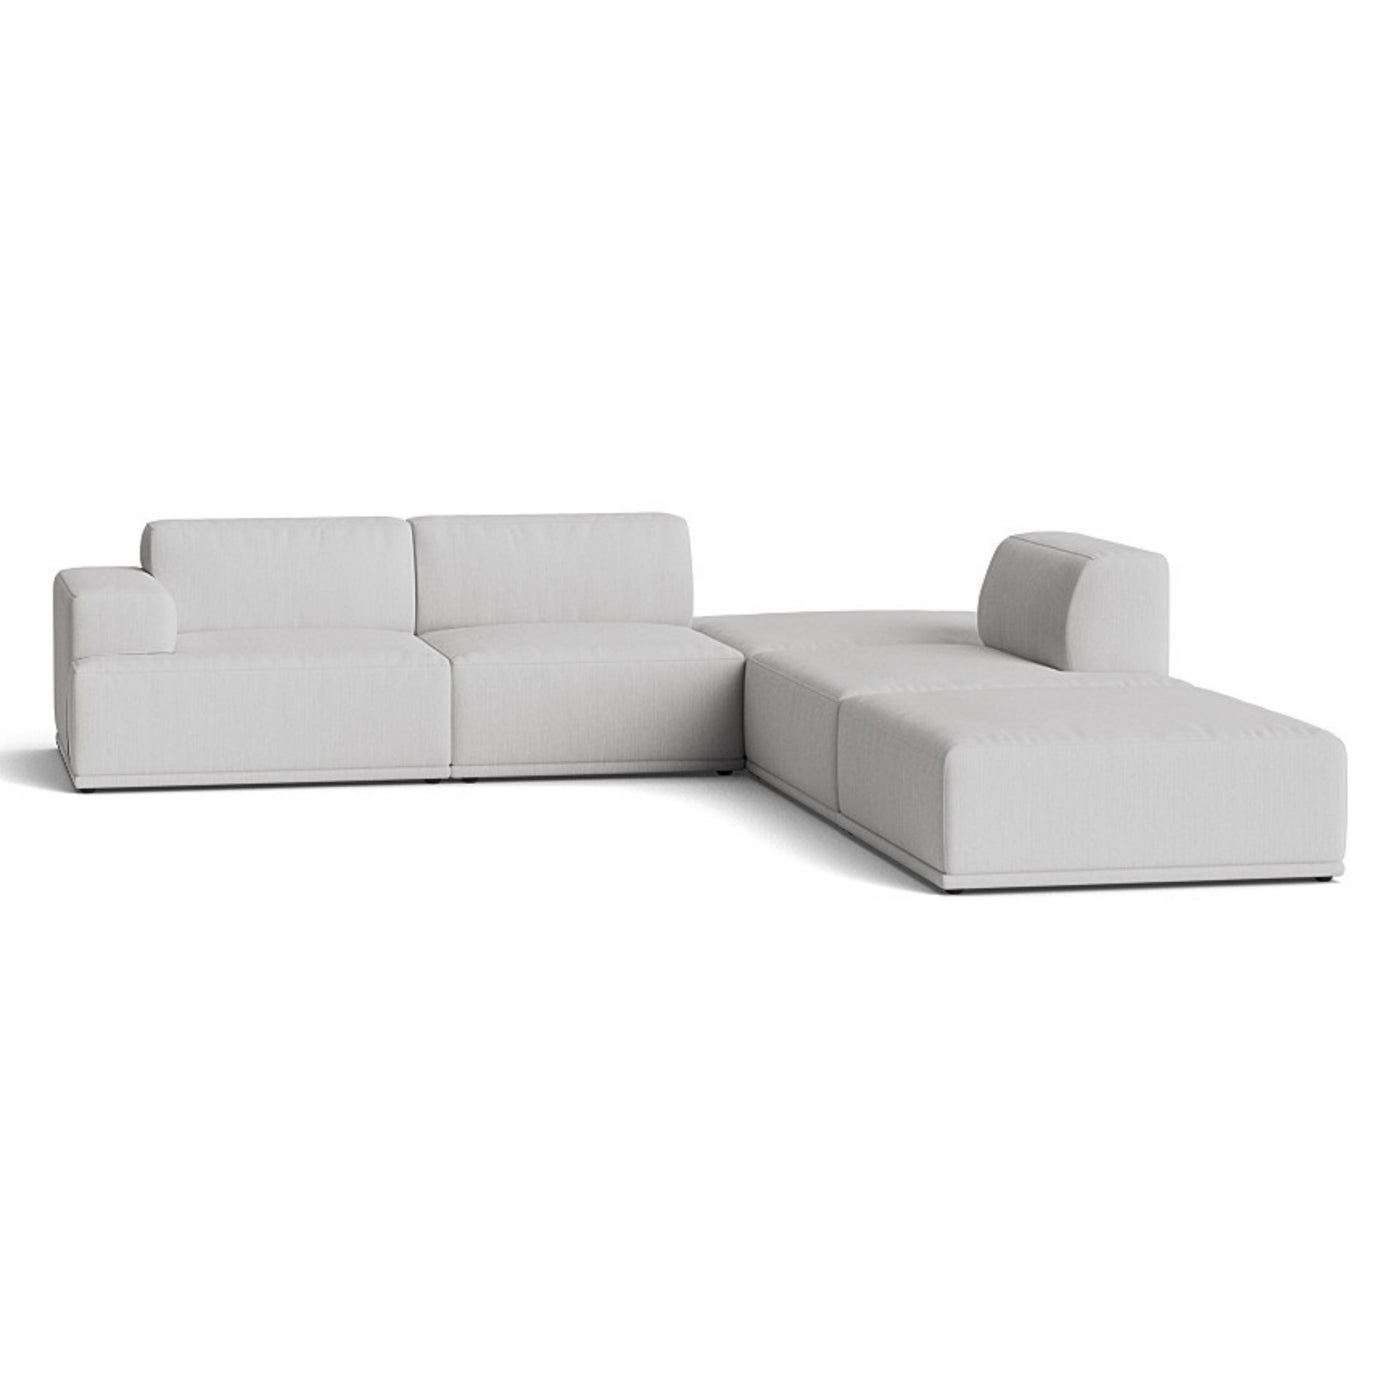 Muuto Connect Soft Modular Corner Sofa, configuration 3. made-to-order from someday designs. #colour_balder-132